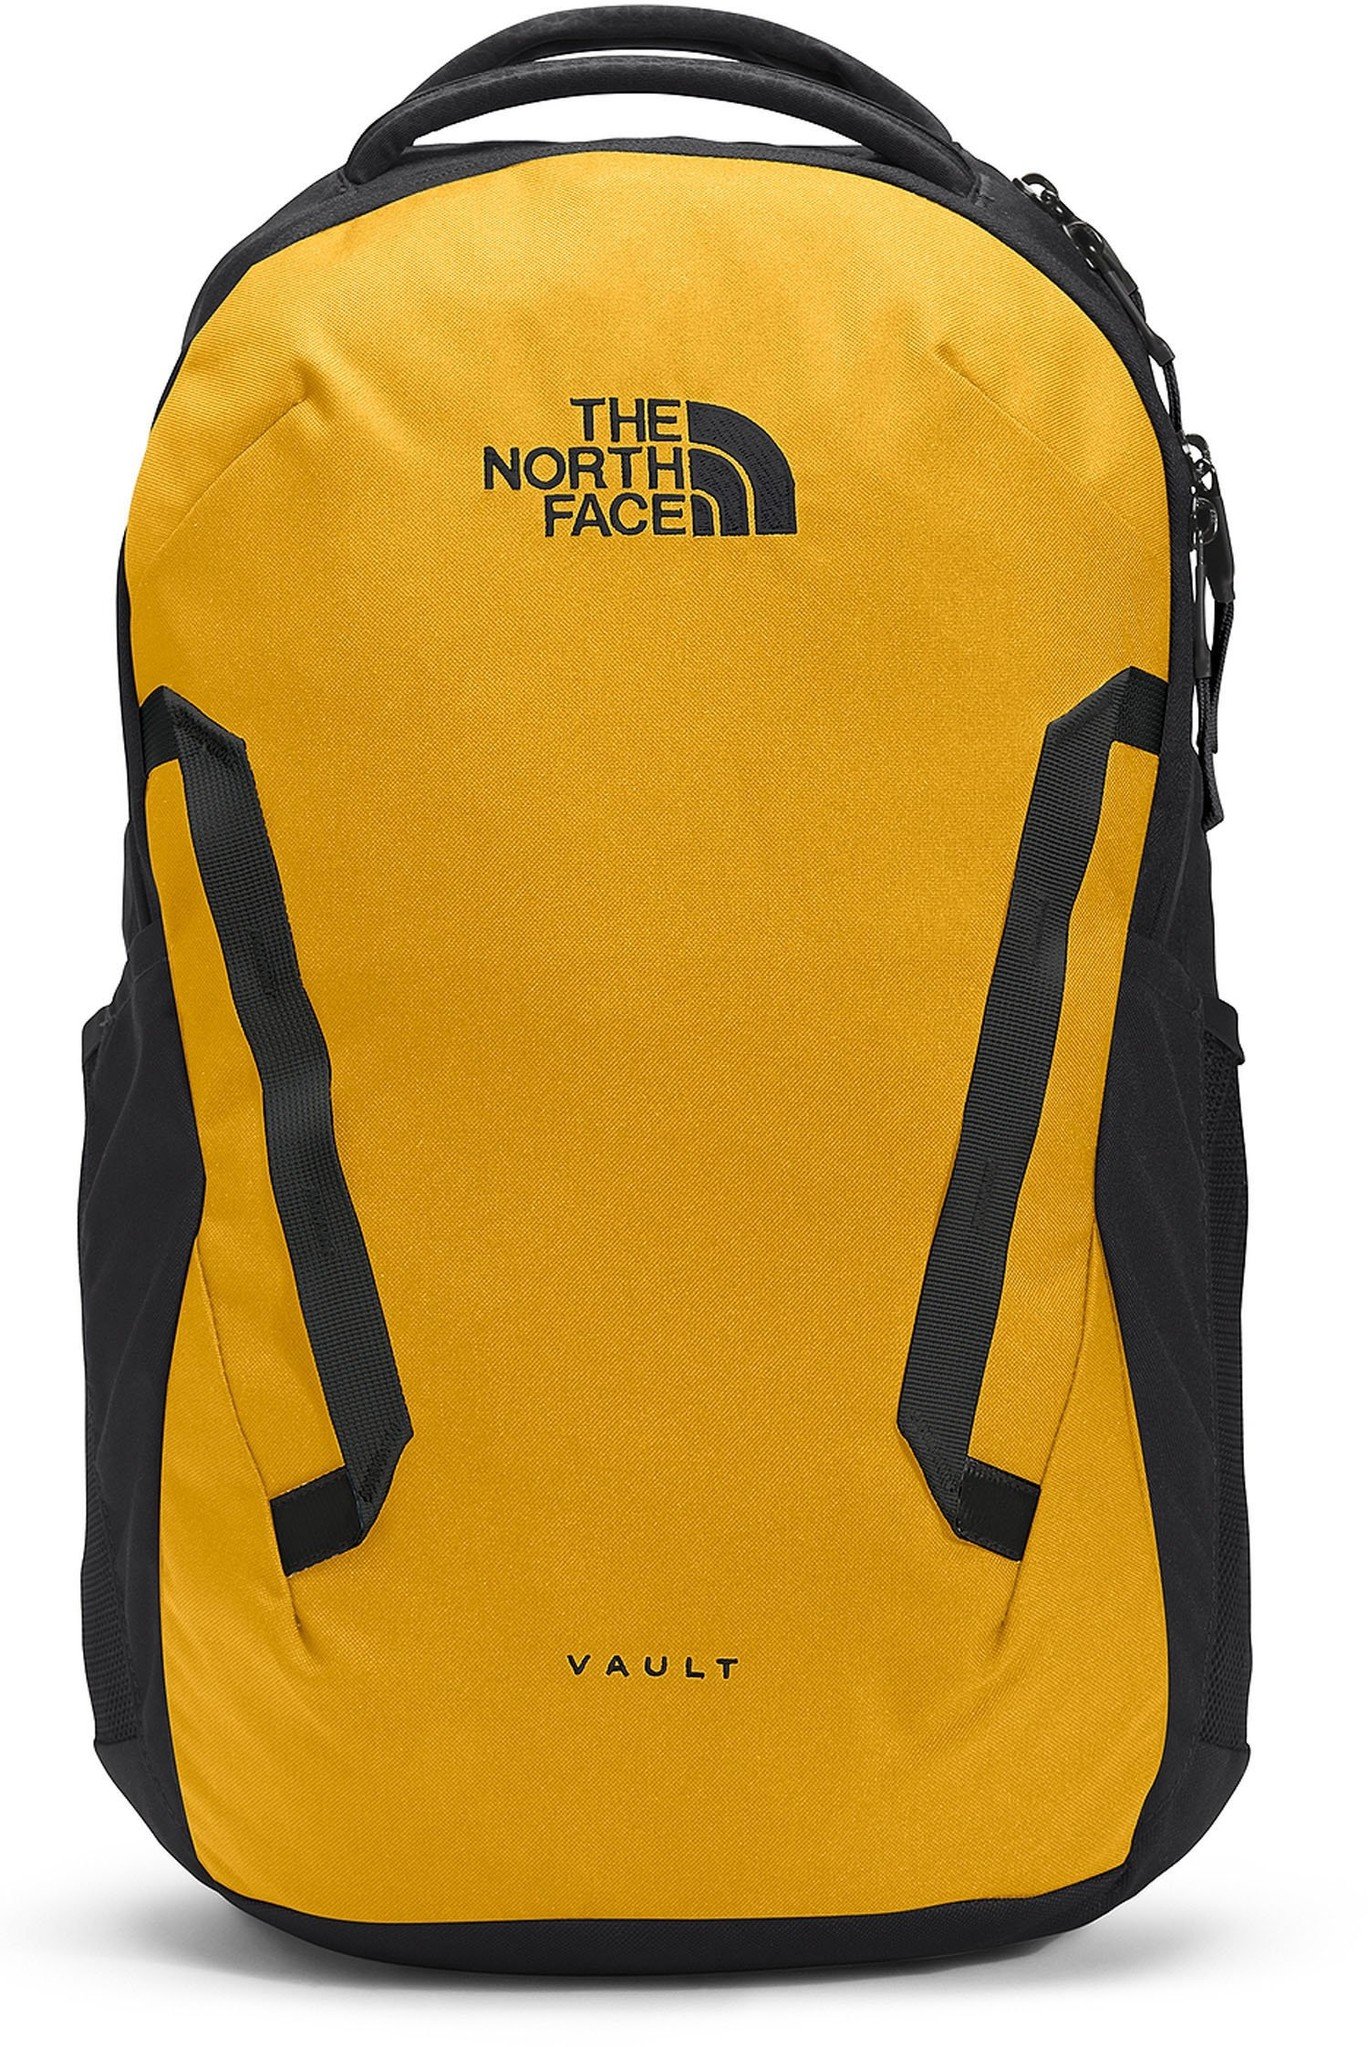 The North Face Vault Travel and Everyday Commuter Laptop Backpack